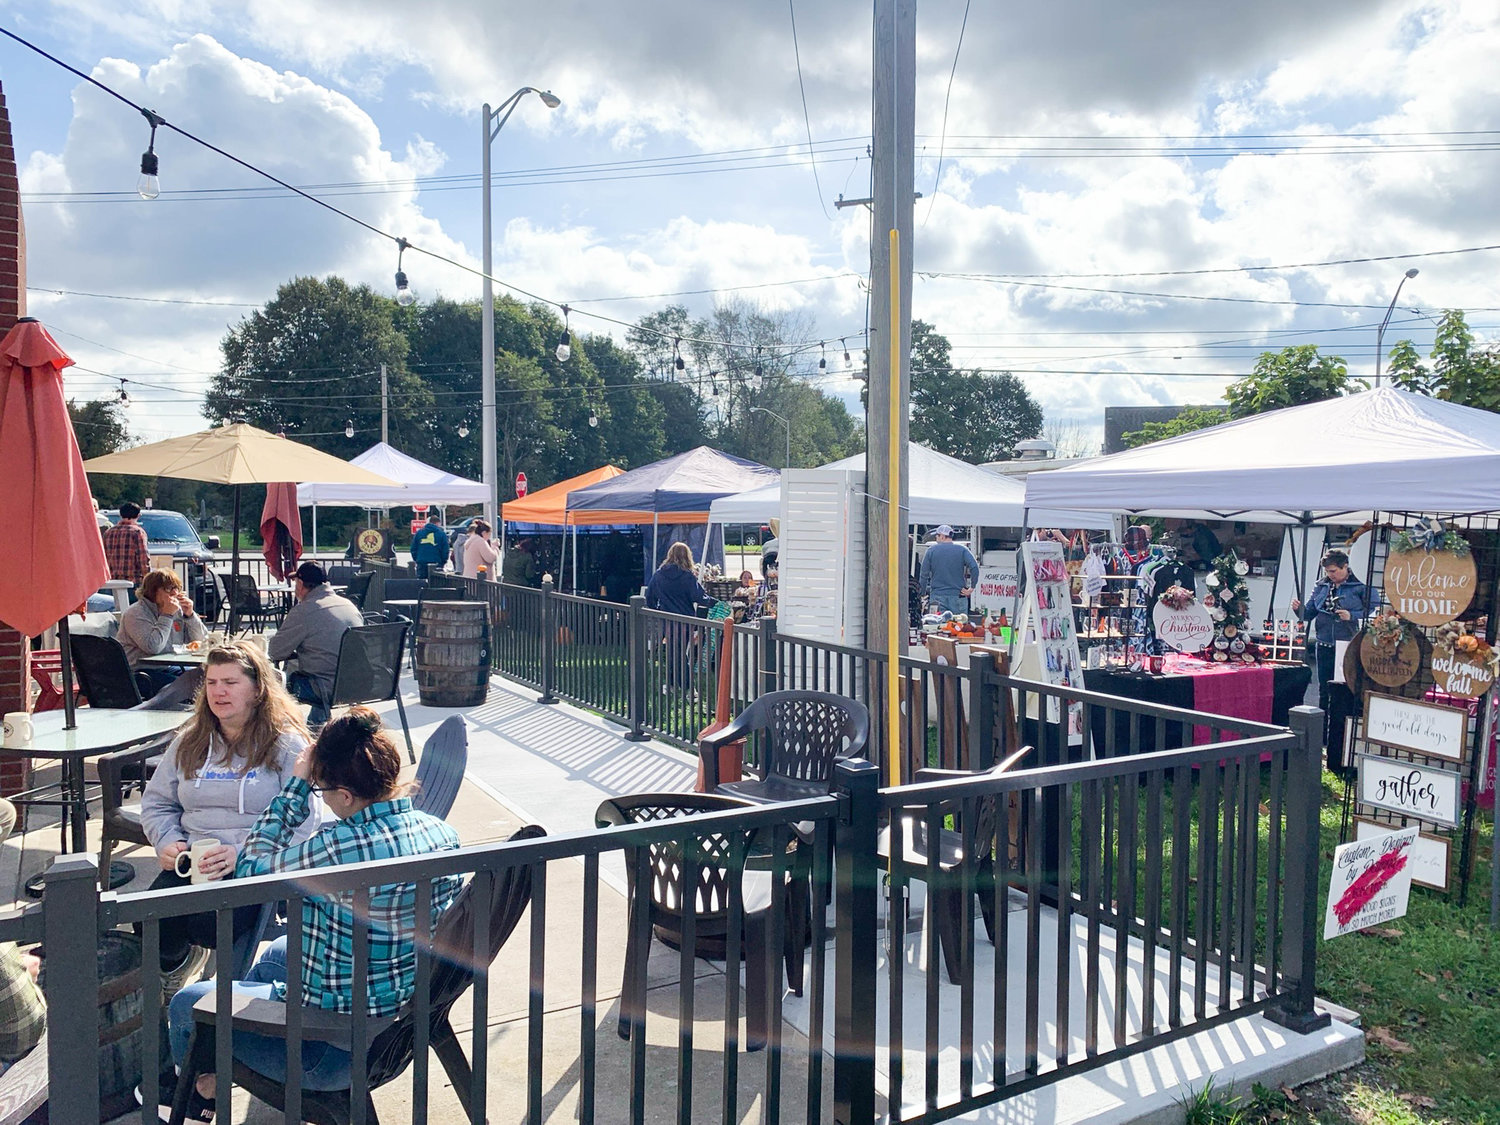 Copper City Brewing Company in Rome is hosting its third annual Fall Festival from 1-9 p.m. Oct. 8 featuring live music, local vendors, a food truck and fall beverages.